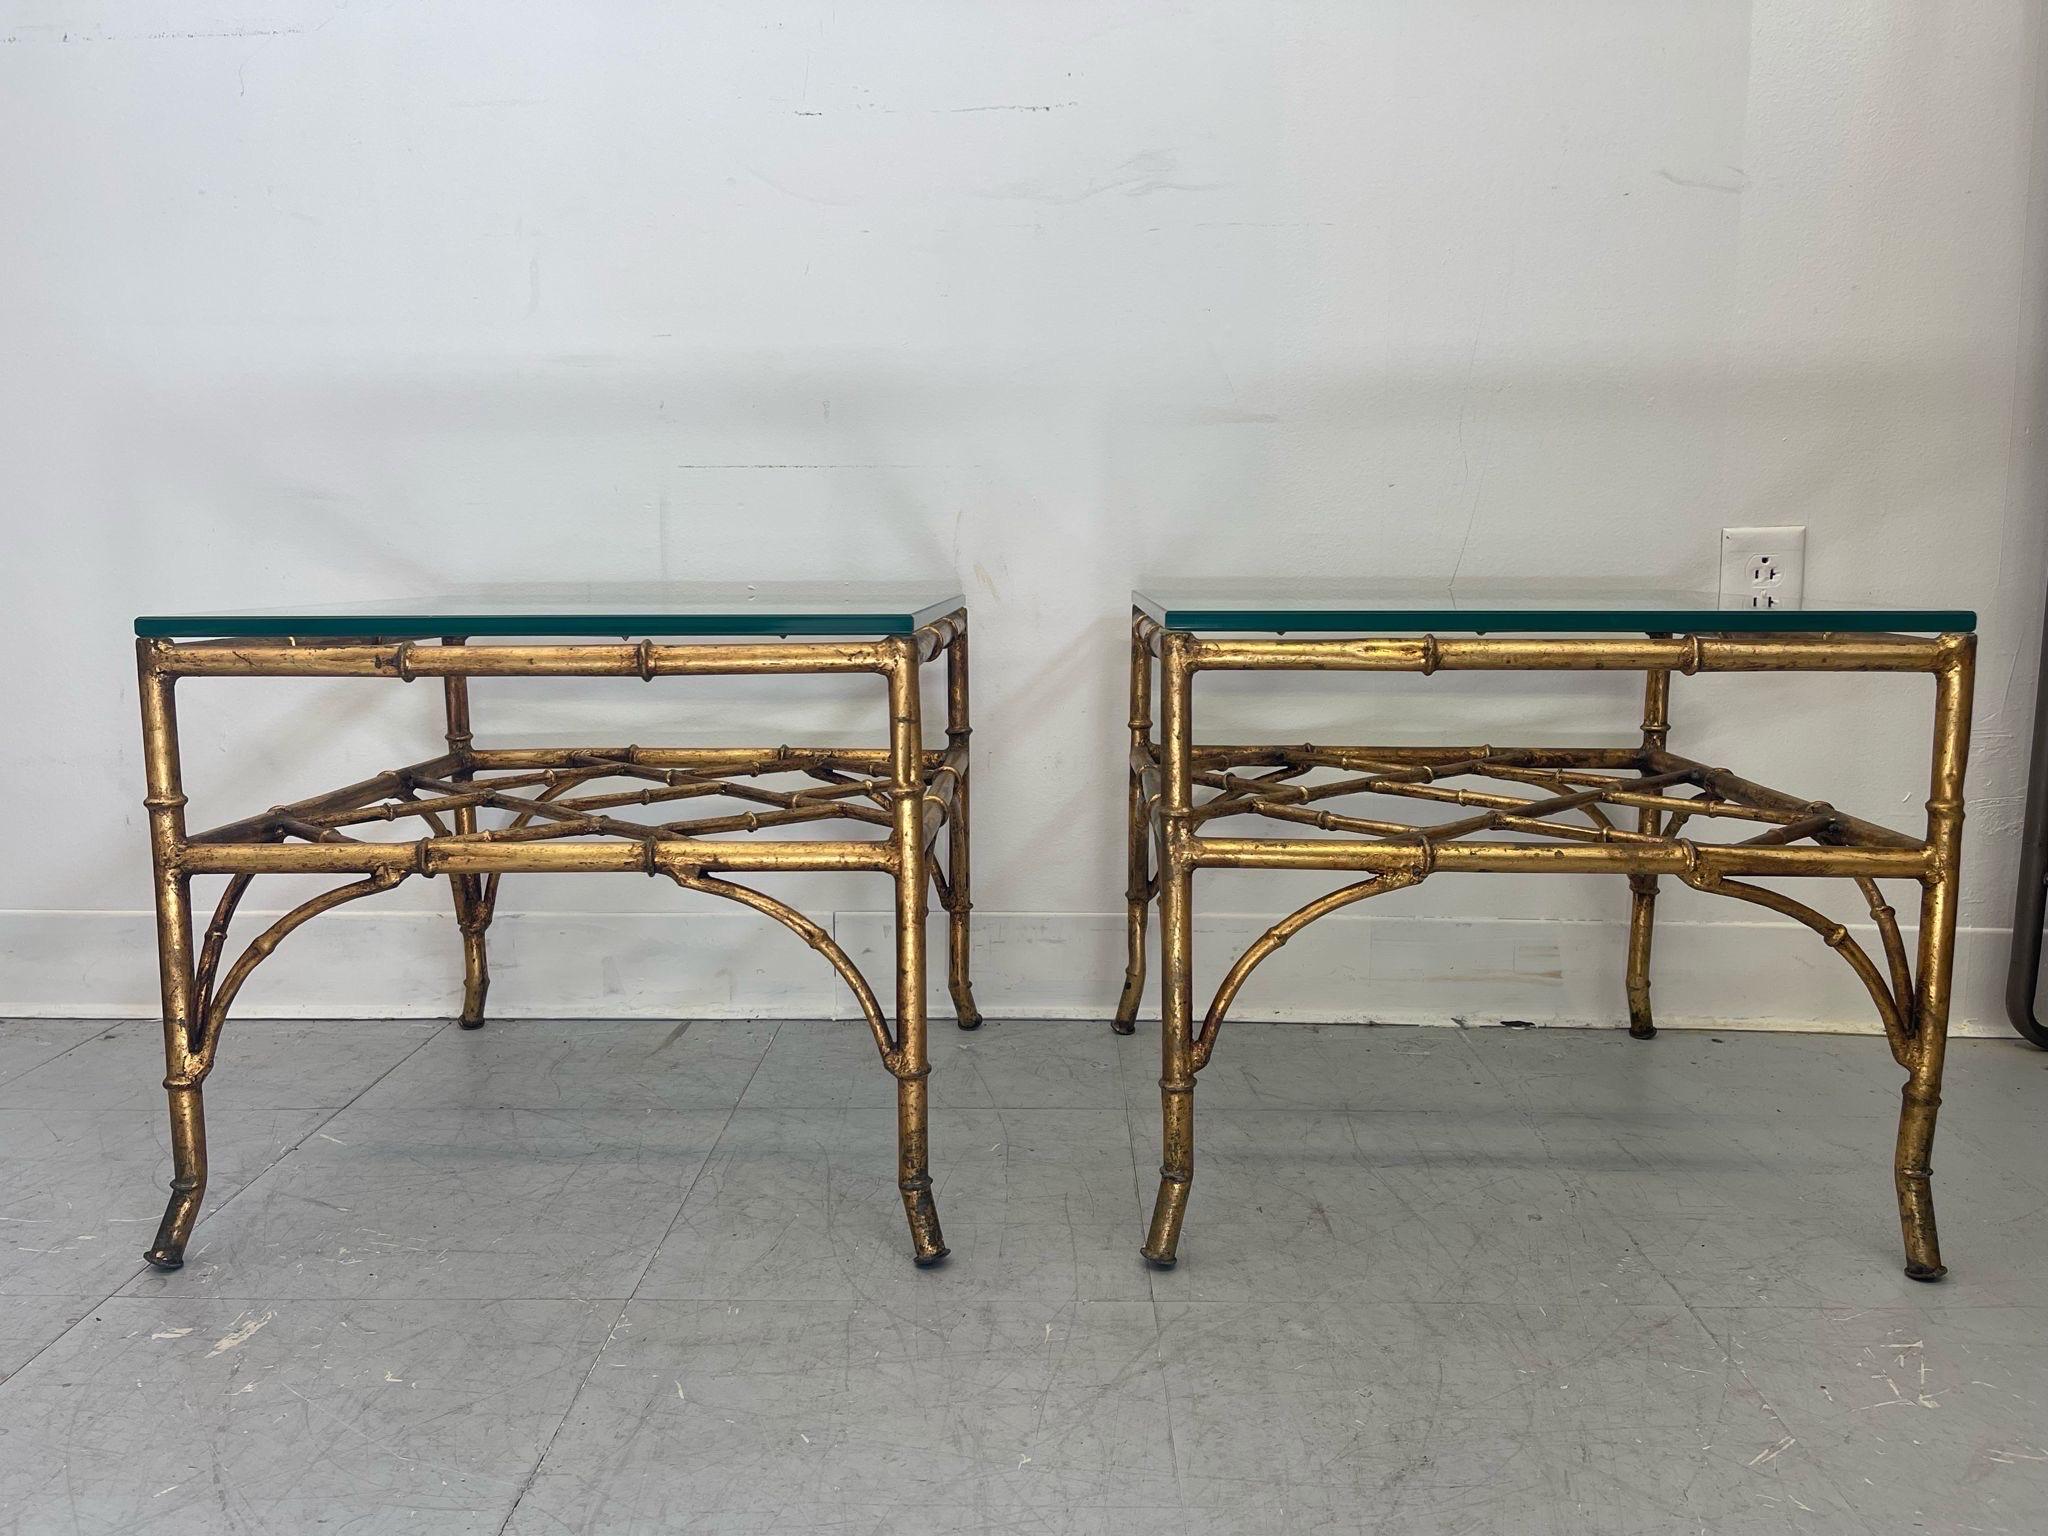 These Faux bamboo End Tables have beautiful lattice detailing beneath their removable Glass Tops. Possibly Circa 1970s, No Makers mark. The material to the base is possibly metal or similar material. Vintage Condition Consistent with Age as